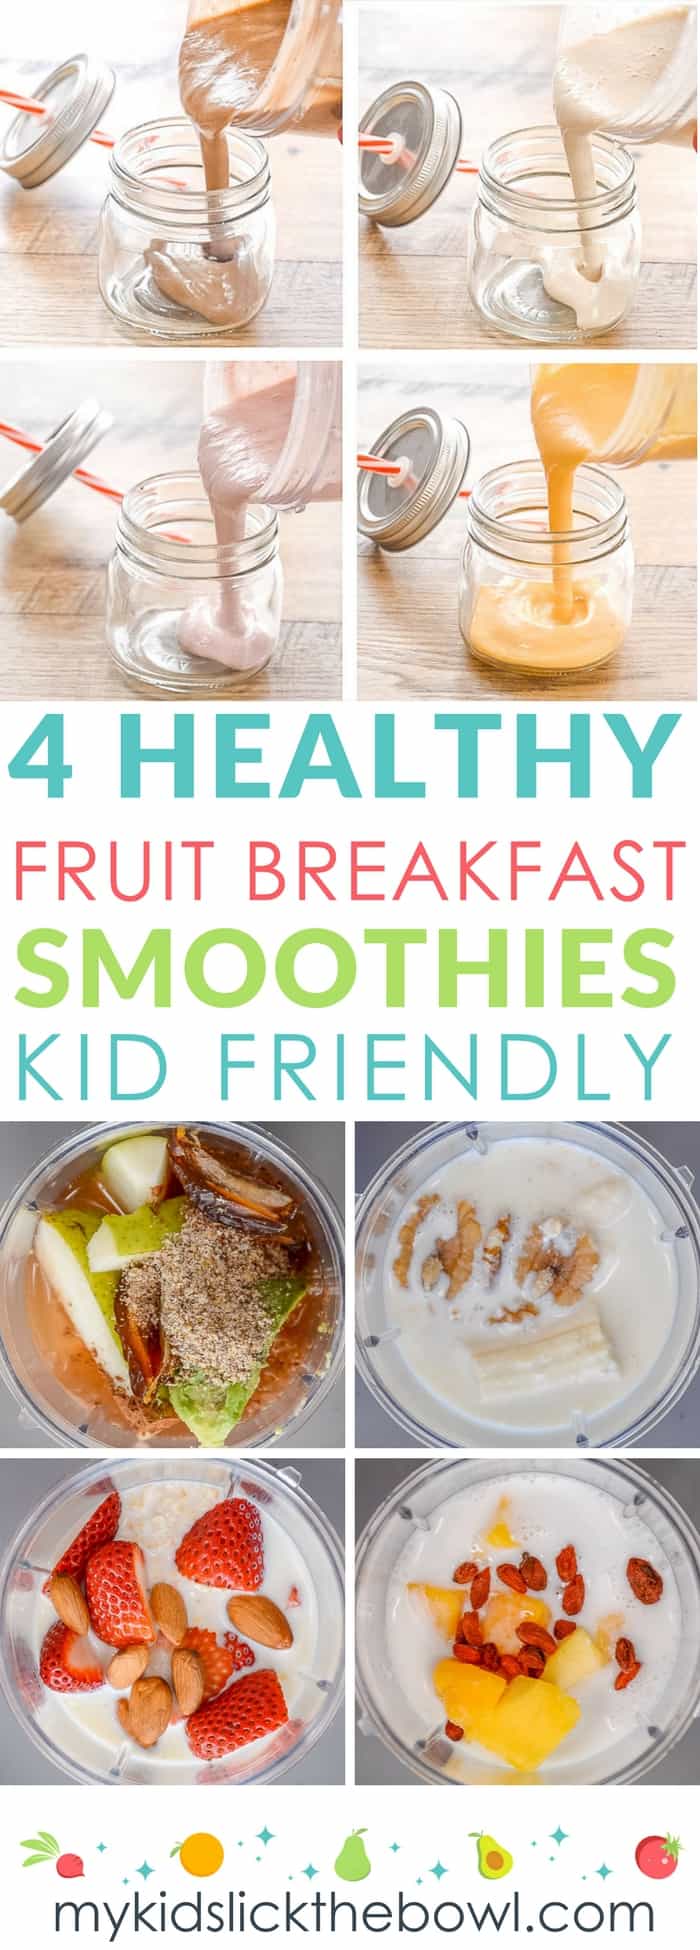 Healthy fruit breakfast smoothies for kids, easy recipes with loaded with healthy fats and grains